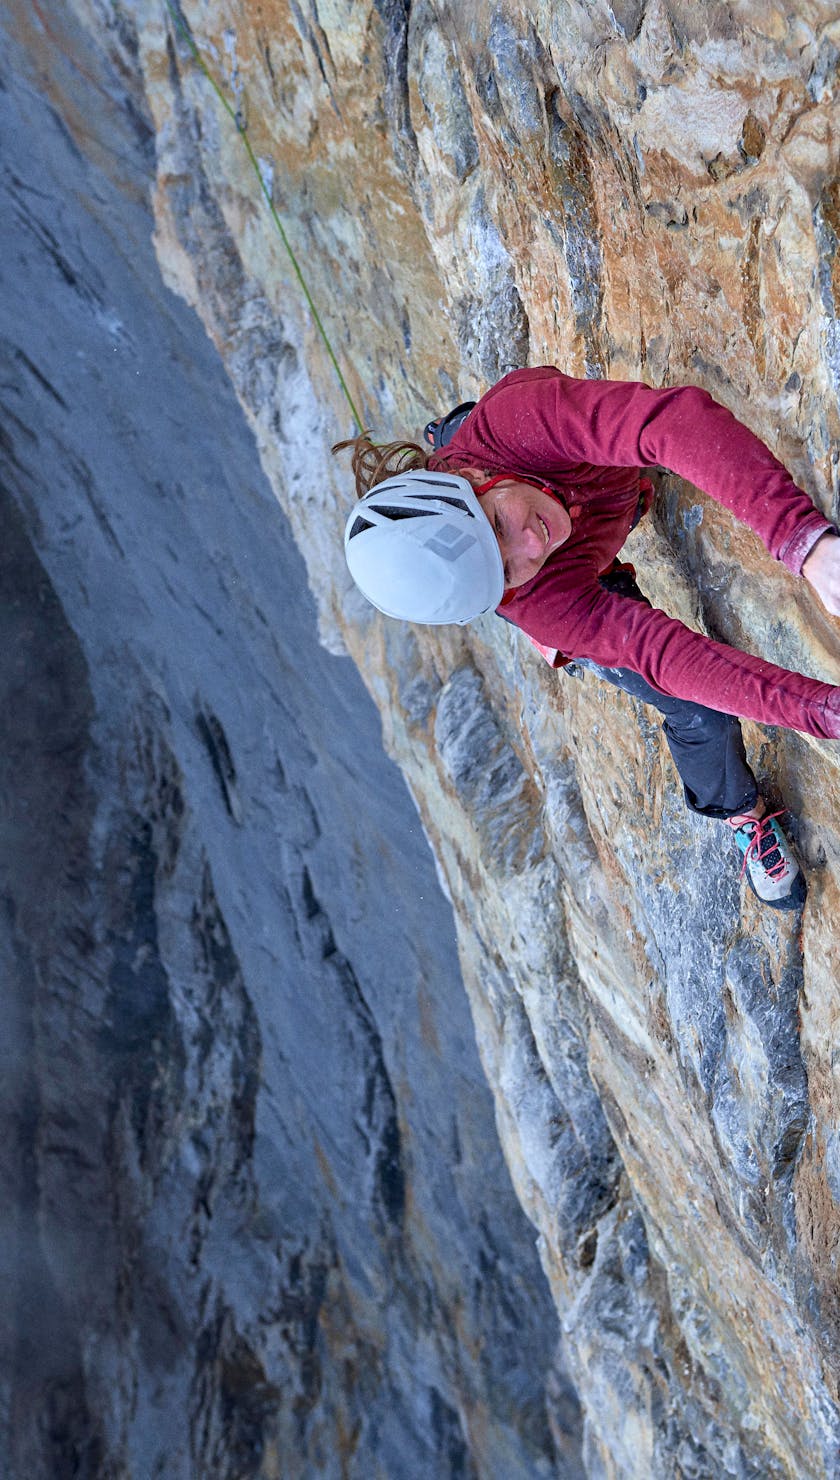 Babsi Zangerl climbs Odyssee 8a+ (5.13c) on the North Face of the Eiger